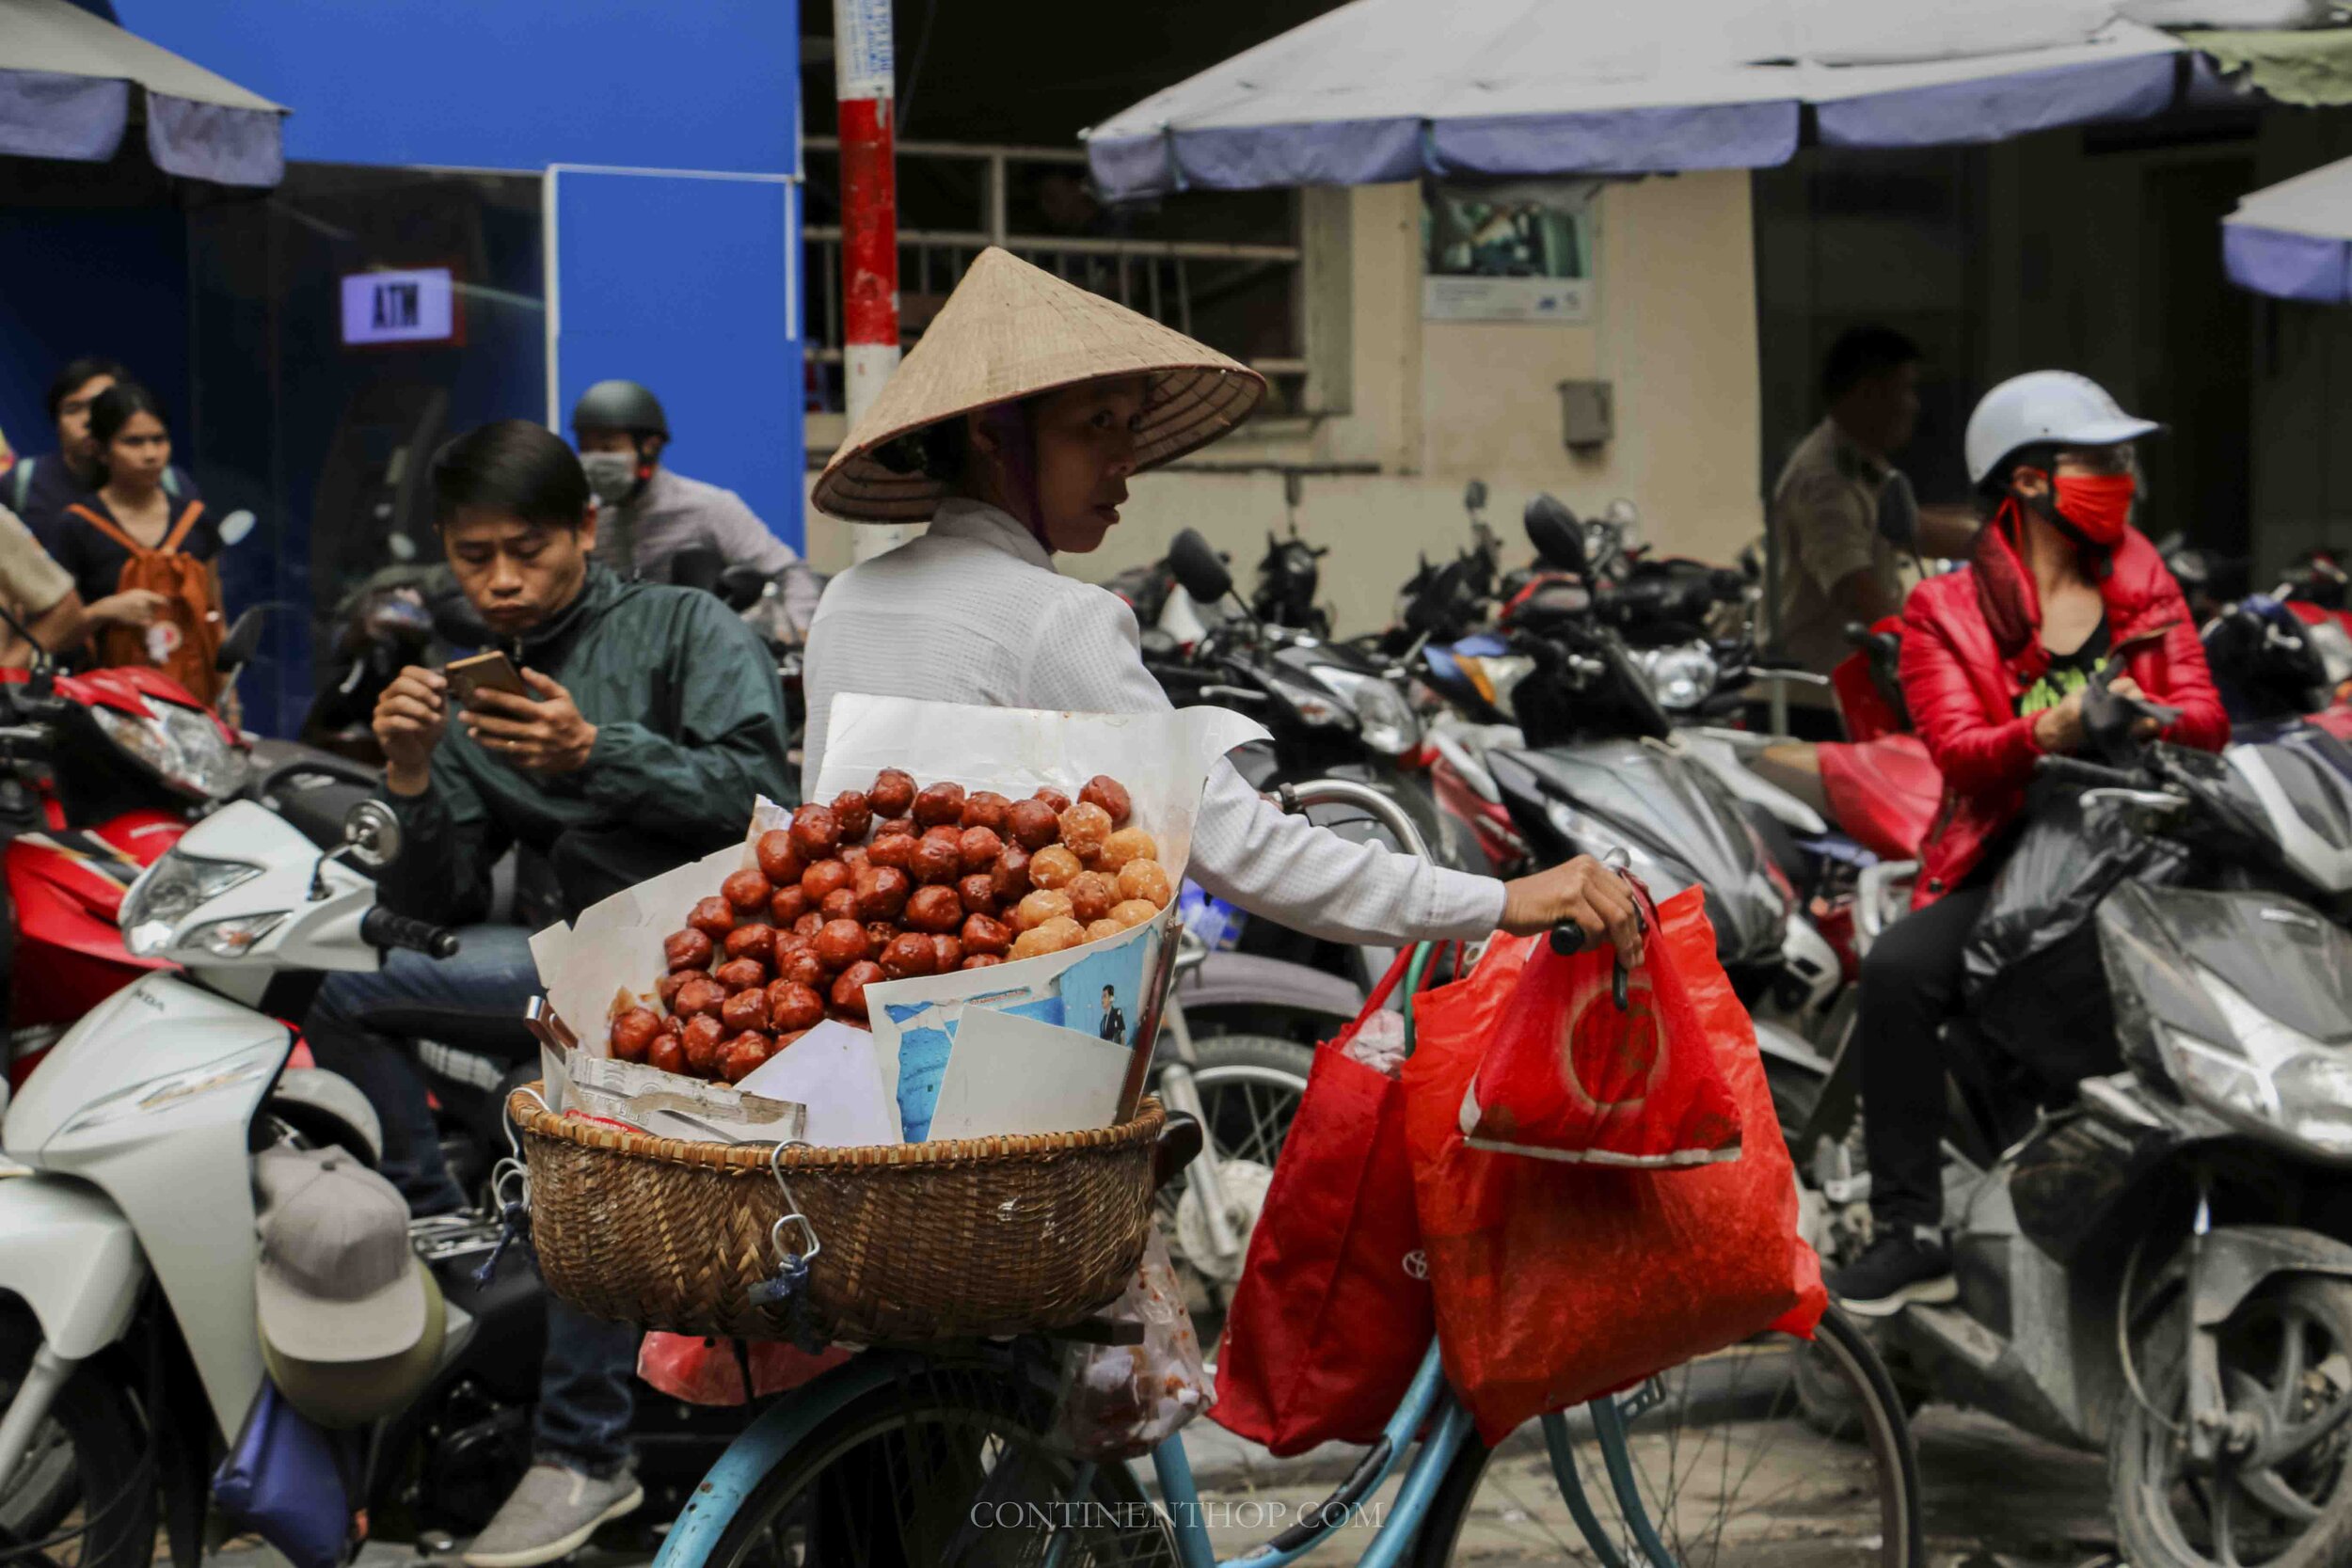 Image of woman in Hanoi Vietnam pushing a bicycle with fruits on it